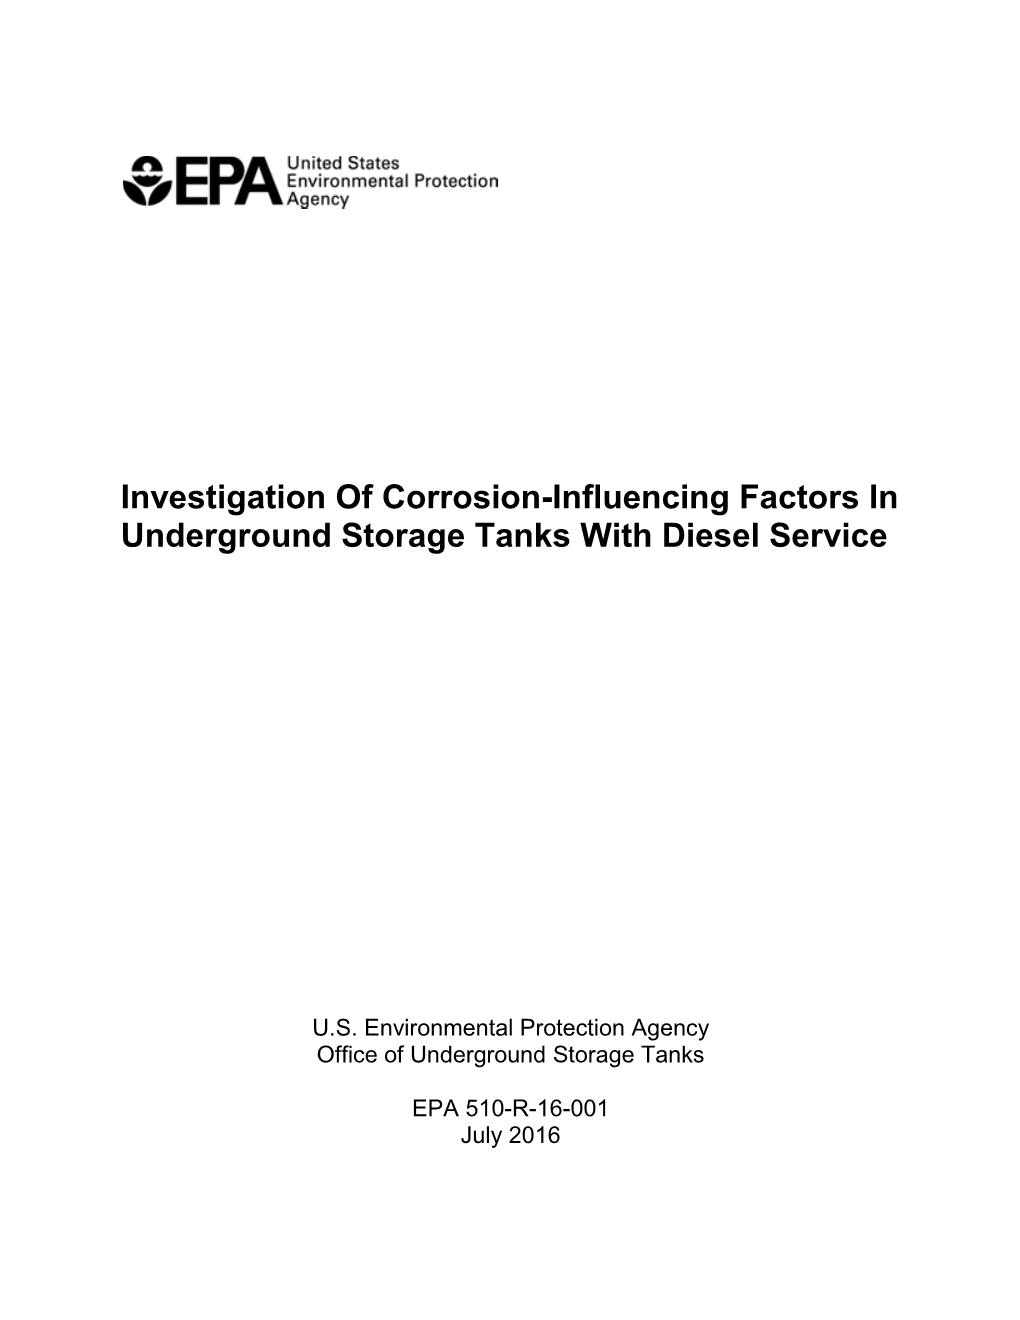 Investigation of Corrosion-Influencing Factors in Underground Storage Tanks with Diesel Service